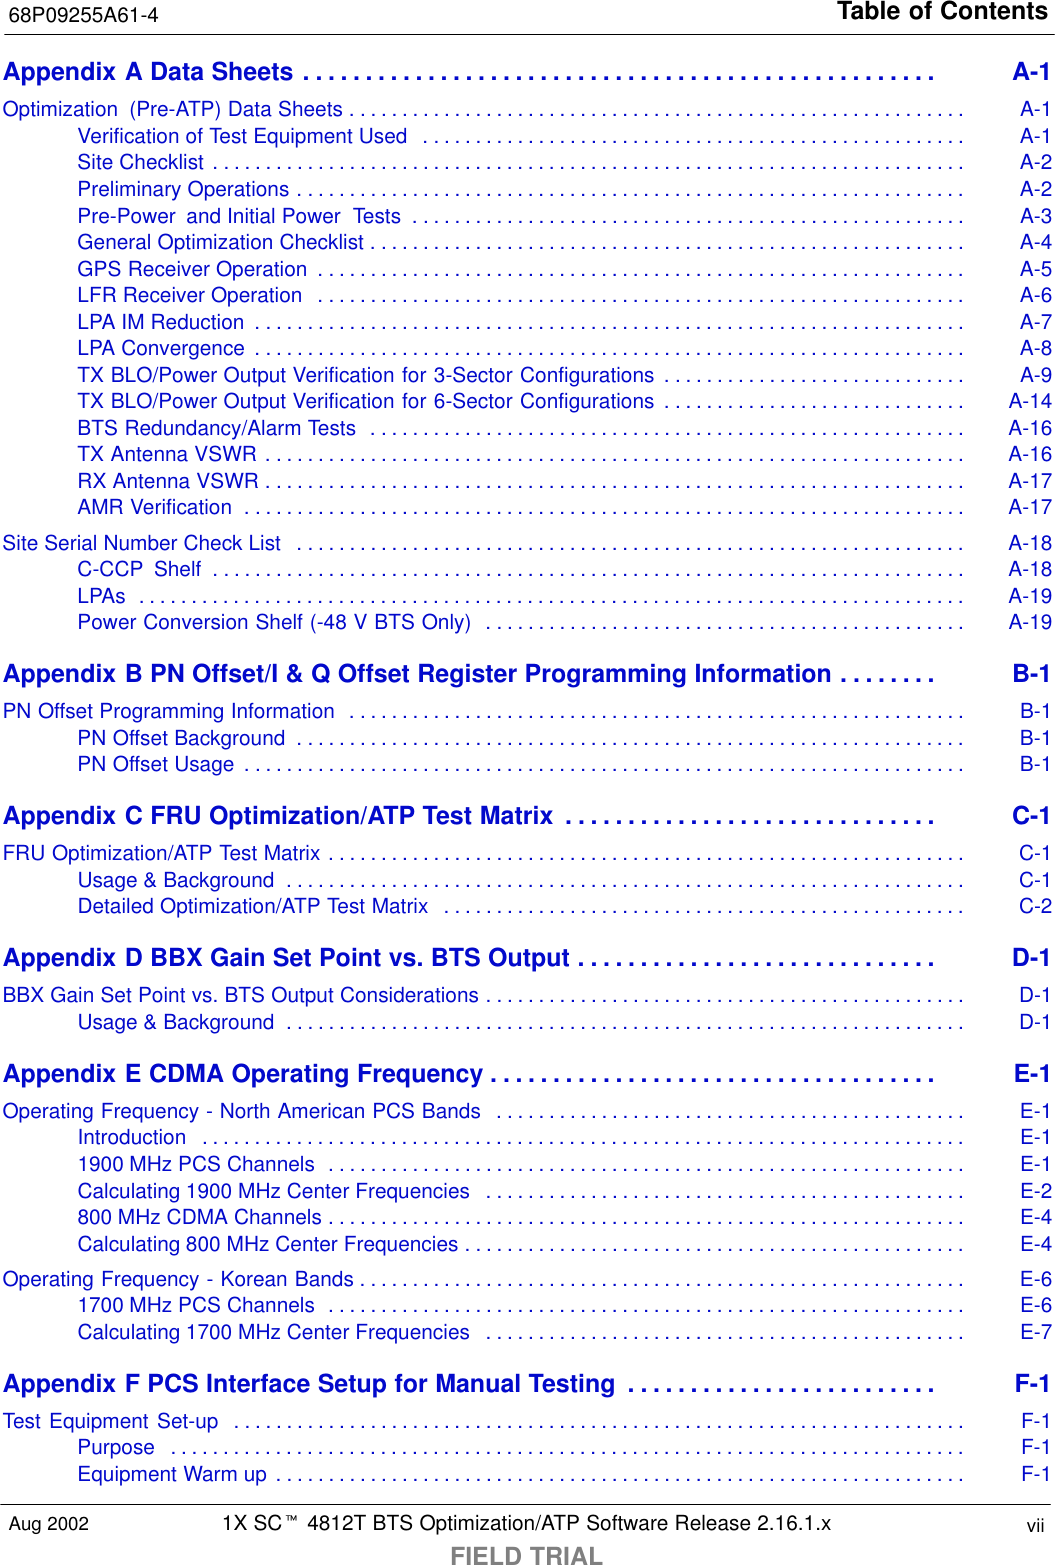 Table of Contents68P09255A61-41X SCt 4812T BTS Optimization/ATP Software Release 2.16.1.xFIELD TRIALviiAug 2002Appendix A Data Sheets A-1. . . . . . . . . . . . . . . . . . . . . . . . . . . . . . . . . . . . . . . . . . . . . . . . . . . Optimization  (Pre-ATP) Data Sheets A-1. . . . . . . . . . . . . . . . . . . . . . . . . . . . . . . . . . . . . . . . . . . . . . . . . . . . . . . . . . . Verification of Test Equipment Used A-1. . . . . . . . . . . . . . . . . . . . . . . . . . . . . . . . . . . . . . . . . . . . . . . . . . . . Site Checklist A-2. . . . . . . . . . . . . . . . . . . . . . . . . . . . . . . . . . . . . . . . . . . . . . . . . . . . . . . . . . . . . . . . . . . . . . . . Preliminary Operations A-2. . . . . . . . . . . . . . . . . . . . . . . . . . . . . . . . . . . . . . . . . . . . . . . . . . . . . . . . . . . . . . . . Pre-Power  and Initial Power  Tests A-3. . . . . . . . . . . . . . . . . . . . . . . . . . . . . . . . . . . . . . . . . . . . . . . . . . . . . General Optimization Checklist A-4. . . . . . . . . . . . . . . . . . . . . . . . . . . . . . . . . . . . . . . . . . . . . . . . . . . . . . . . . GPS Receiver Operation A-5. . . . . . . . . . . . . . . . . . . . . . . . . . . . . . . . . . . . . . . . . . . . . . . . . . . . . . . . . . . . . . LFR Receiver Operation A-6. . . . . . . . . . . . . . . . . . . . . . . . . . . . . . . . . . . . . . . . . . . . . . . . . . . . . . . . . . . . . . LPA IM Reduction A-7. . . . . . . . . . . . . . . . . . . . . . . . . . . . . . . . . . . . . . . . . . . . . . . . . . . . . . . . . . . . . . . . . . . . LPA Convergence A-8. . . . . . . . . . . . . . . . . . . . . . . . . . . . . . . . . . . . . . . . . . . . . . . . . . . . . . . . . . . . . . . . . . . . TX BLO/Power Output Verification for 3-Sector Configurations A-9. . . . . . . . . . . . . . . . . . . . . . . . . . . . . TX BLO/Power Output Verification for 6-Sector Configurations A-14. . . . . . . . . . . . . . . . . . . . . . . . . . . . . BTS Redundancy/Alarm Tests A-16. . . . . . . . . . . . . . . . . . . . . . . . . . . . . . . . . . . . . . . . . . . . . . . . . . . . . . . . . TX Antenna VSWR A-16. . . . . . . . . . . . . . . . . . . . . . . . . . . . . . . . . . . . . . . . . . . . . . . . . . . . . . . . . . . . . . . . . . . RX Antenna VSWR A-17. . . . . . . . . . . . . . . . . . . . . . . . . . . . . . . . . . . . . . . . . . . . . . . . . . . . . . . . . . . . . . . . . . . AMR Verification A-17. . . . . . . . . . . . . . . . . . . . . . . . . . . . . . . . . . . . . . . . . . . . . . . . . . . . . . . . . . . . . . . . . . . . . Site Serial Number Check List A-18. . . . . . . . . . . . . . . . . . . . . . . . . . . . . . . . . . . . . . . . . . . . . . . . . . . . . . . . . . . . . . . . C-CCP  Shelf A-18. . . . . . . . . . . . . . . . . . . . . . . . . . . . . . . . . . . . . . . . . . . . . . . . . . . . . . . . . . . . . . . . . . . . . . . . LPAs A-19. . . . . . . . . . . . . . . . . . . . . . . . . . . . . . . . . . . . . . . . . . . . . . . . . . . . . . . . . . . . . . . . . . . . . . . . . . . . . . . Power Conversion Shelf (-48 V BTS Only) A-19. . . . . . . . . . . . . . . . . . . . . . . . . . . . . . . . . . . . . . . . . . . . . . Appendix B PN Offset/I &amp; Q Offset Register Programming Information B-1. . . . . . . . PN Offset Programming Information B-1. . . . . . . . . . . . . . . . . . . . . . . . . . . . . . . . . . . . . . . . . . . . . . . . . . . . . . . . . . . PN Offset Background B-1. . . . . . . . . . . . . . . . . . . . . . . . . . . . . . . . . . . . . . . . . . . . . . . . . . . . . . . . . . . . . . . . PN Offset Usage B-1. . . . . . . . . . . . . . . . . . . . . . . . . . . . . . . . . . . . . . . . . . . . . . . . . . . . . . . . . . . . . . . . . . . . . Appendix C FRU Optimization/ATP Test Matrix C-1. . . . . . . . . . . . . . . . . . . . . . . . . . . . . . FRU Optimization/ATP Test Matrix C-1. . . . . . . . . . . . . . . . . . . . . . . . . . . . . . . . . . . . . . . . . . . . . . . . . . . . . . . . . . . . . Usage &amp; Background C-1. . . . . . . . . . . . . . . . . . . . . . . . . . . . . . . . . . . . . . . . . . . . . . . . . . . . . . . . . . . . . . . . . Detailed Optimization/ATP Test Matrix C-2. . . . . . . . . . . . . . . . . . . . . . . . . . . . . . . . . . . . . . . . . . . . . . . . . . Appendix D BBX Gain Set Point vs. BTS Output D-1. . . . . . . . . . . . . . . . . . . . . . . . . . . . . BBX Gain Set Point vs. BTS Output Considerations D-1. . . . . . . . . . . . . . . . . . . . . . . . . . . . . . . . . . . . . . . . . . . . . . Usage &amp; Background D-1. . . . . . . . . . . . . . . . . . . . . . . . . . . . . . . . . . . . . . . . . . . . . . . . . . . . . . . . . . . . . . . . . Appendix E CDMA Operating Frequency E-1. . . . . . . . . . . . . . . . . . . . . . . . . . . . . . . . . . . . Operating Frequency - North American PCS Bands E-1. . . . . . . . . . . . . . . . . . . . . . . . . . . . . . . . . . . . . . . . . . . . . Introduction E-1. . . . . . . . . . . . . . . . . . . . . . . . . . . . . . . . . . . . . . . . . . . . . . . . . . . . . . . . . . . . . . . . . . . . . . . . . 1900 MHz PCS Channels E-1. . . . . . . . . . . . . . . . . . . . . . . . . . . . . . . . . . . . . . . . . . . . . . . . . . . . . . . . . . . . . Calculating 1900 MHz Center Frequencies E-2. . . . . . . . . . . . . . . . . . . . . . . . . . . . . . . . . . . . . . . . . . . . . . 800 MHz CDMA Channels E-4. . . . . . . . . . . . . . . . . . . . . . . . . . . . . . . . . . . . . . . . . . . . . . . . . . . . . . . . . . . . . Calculating 800 MHz Center Frequencies E-4. . . . . . . . . . . . . . . . . . . . . . . . . . . . . . . . . . . . . . . . . . . . . . . . Operating Frequency - Korean Bands E-6. . . . . . . . . . . . . . . . . . . . . . . . . . . . . . . . . . . . . . . . . . . . . . . . . . . . . . . . . . 1700 MHz PCS Channels E-6. . . . . . . . . . . . . . . . . . . . . . . . . . . . . . . . . . . . . . . . . . . . . . . . . . . . . . . . . . . . . Calculating 1700 MHz Center Frequencies E-7. . . . . . . . . . . . . . . . . . . . . . . . . . . . . . . . . . . . . . . . . . . . . . Appendix F PCS Interface Setup for Manual Testing F-1. . . . . . . . . . . . . . . . . . . . . . . . . Test Equipment Set-up F-1. . . . . . . . . . . . . . . . . . . . . . . . . . . . . . . . . . . . . . . . . . . . . . . . . . . . . . . . . . . . . . . . . . . . . . Purpose F-1. . . . . . . . . . . . . . . . . . . . . . . . . . . . . . . . . . . . . . . . . . . . . . . . . . . . . . . . . . . . . . . . . . . . . . . . . . . . Equipment Warm up F-1. . . . . . . . . . . . . . . . . . . . . . . . . . . . . . . . . . . . . . . . . . . . . . . . . . . . . . . . . . . . . . . . . . 